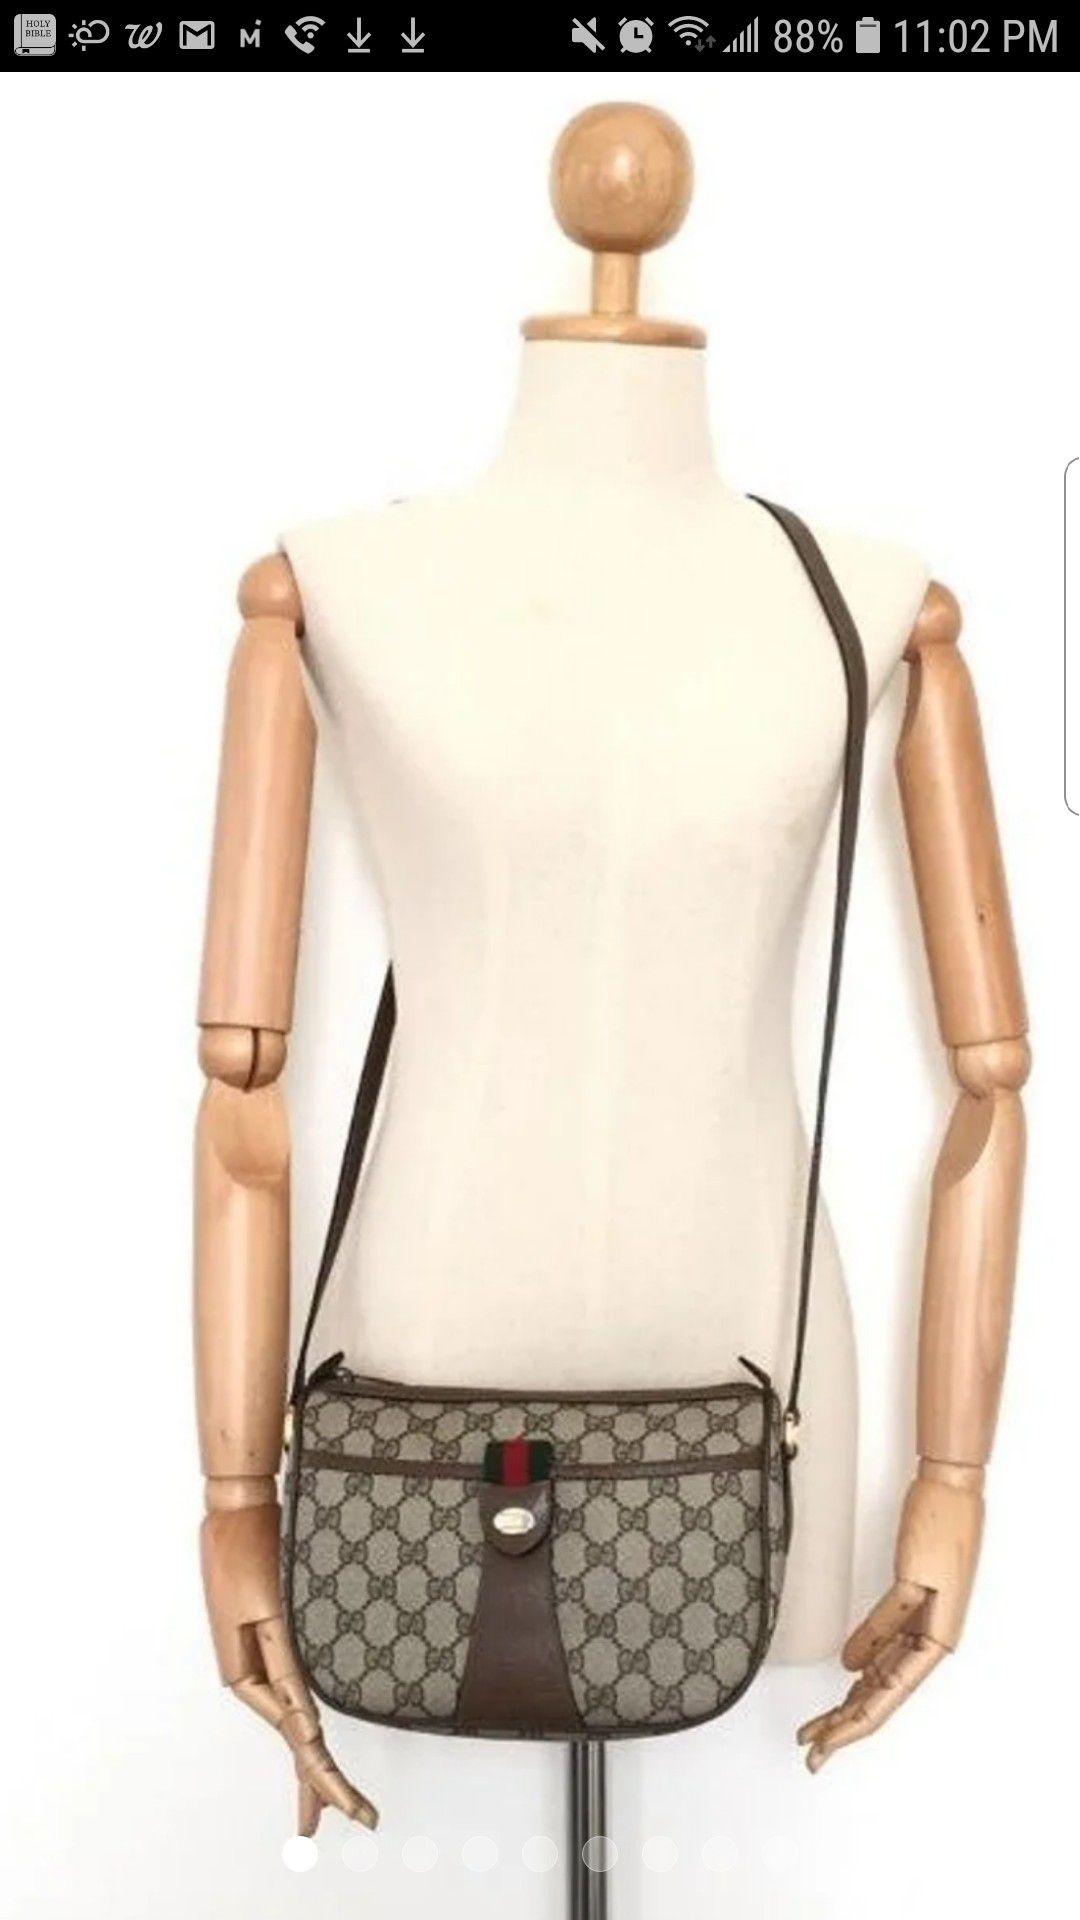 Authentic Gucci Body Bag